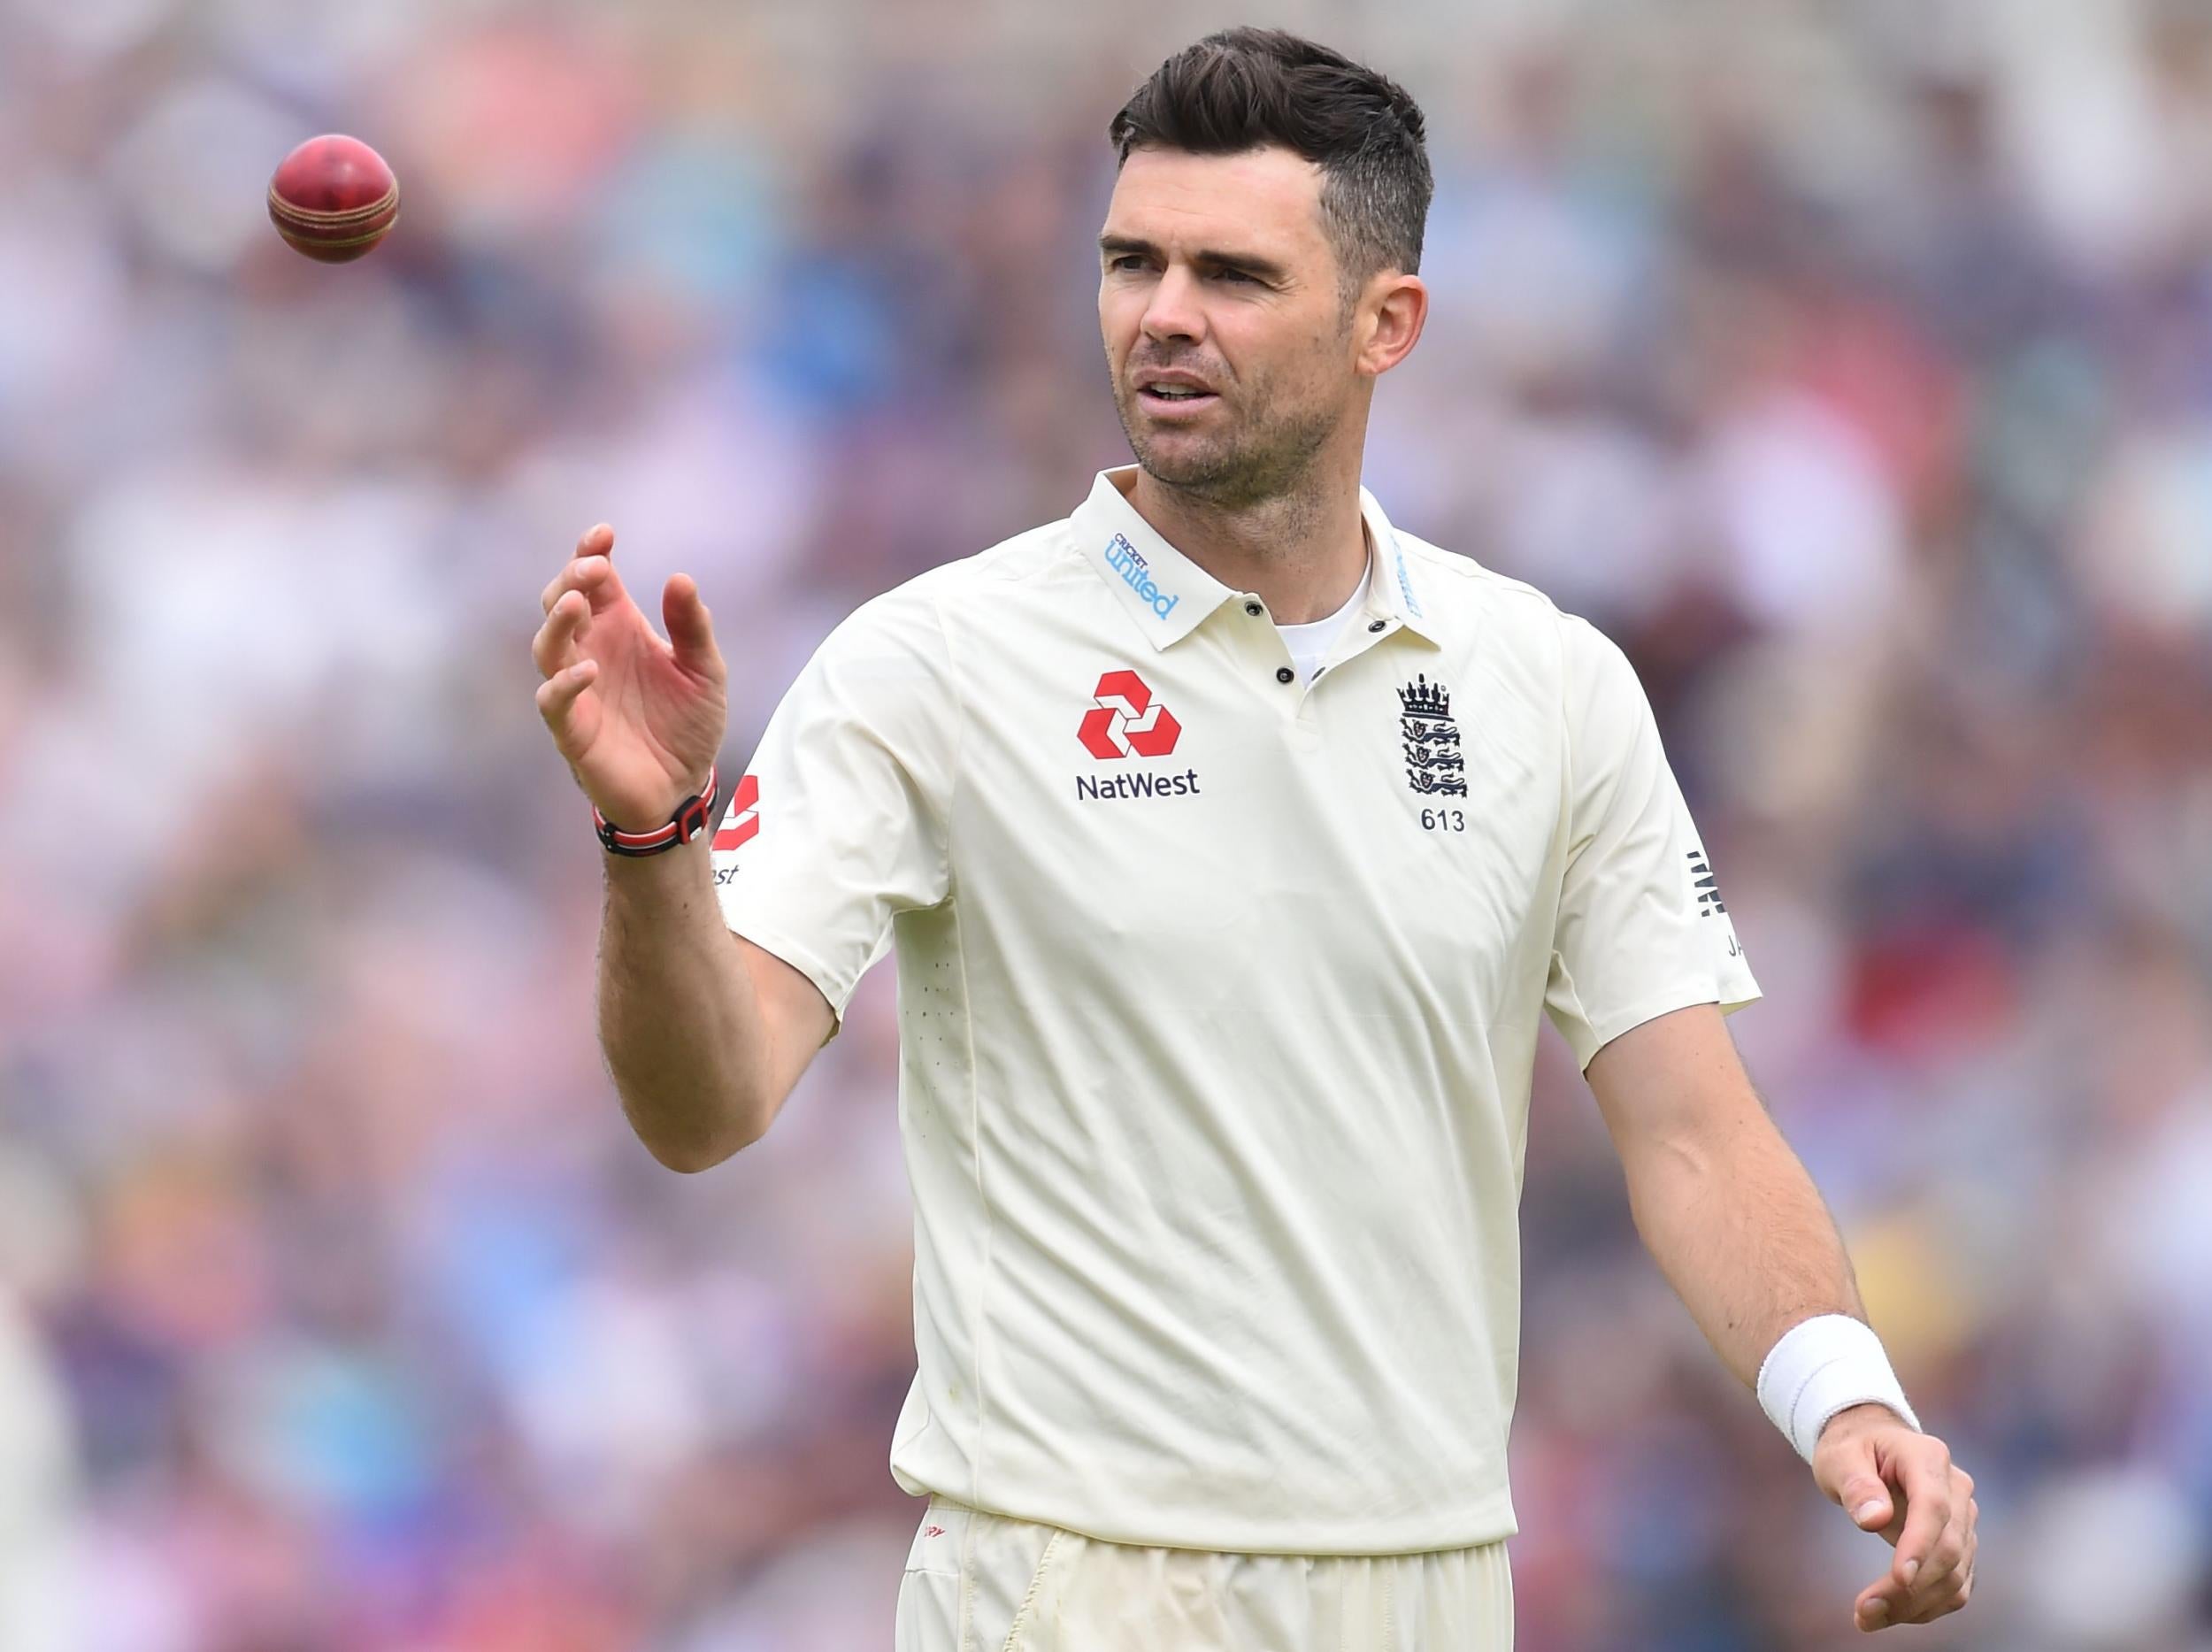 The Old Trafford Pavilion End will be renamed after home favourite James Anderson